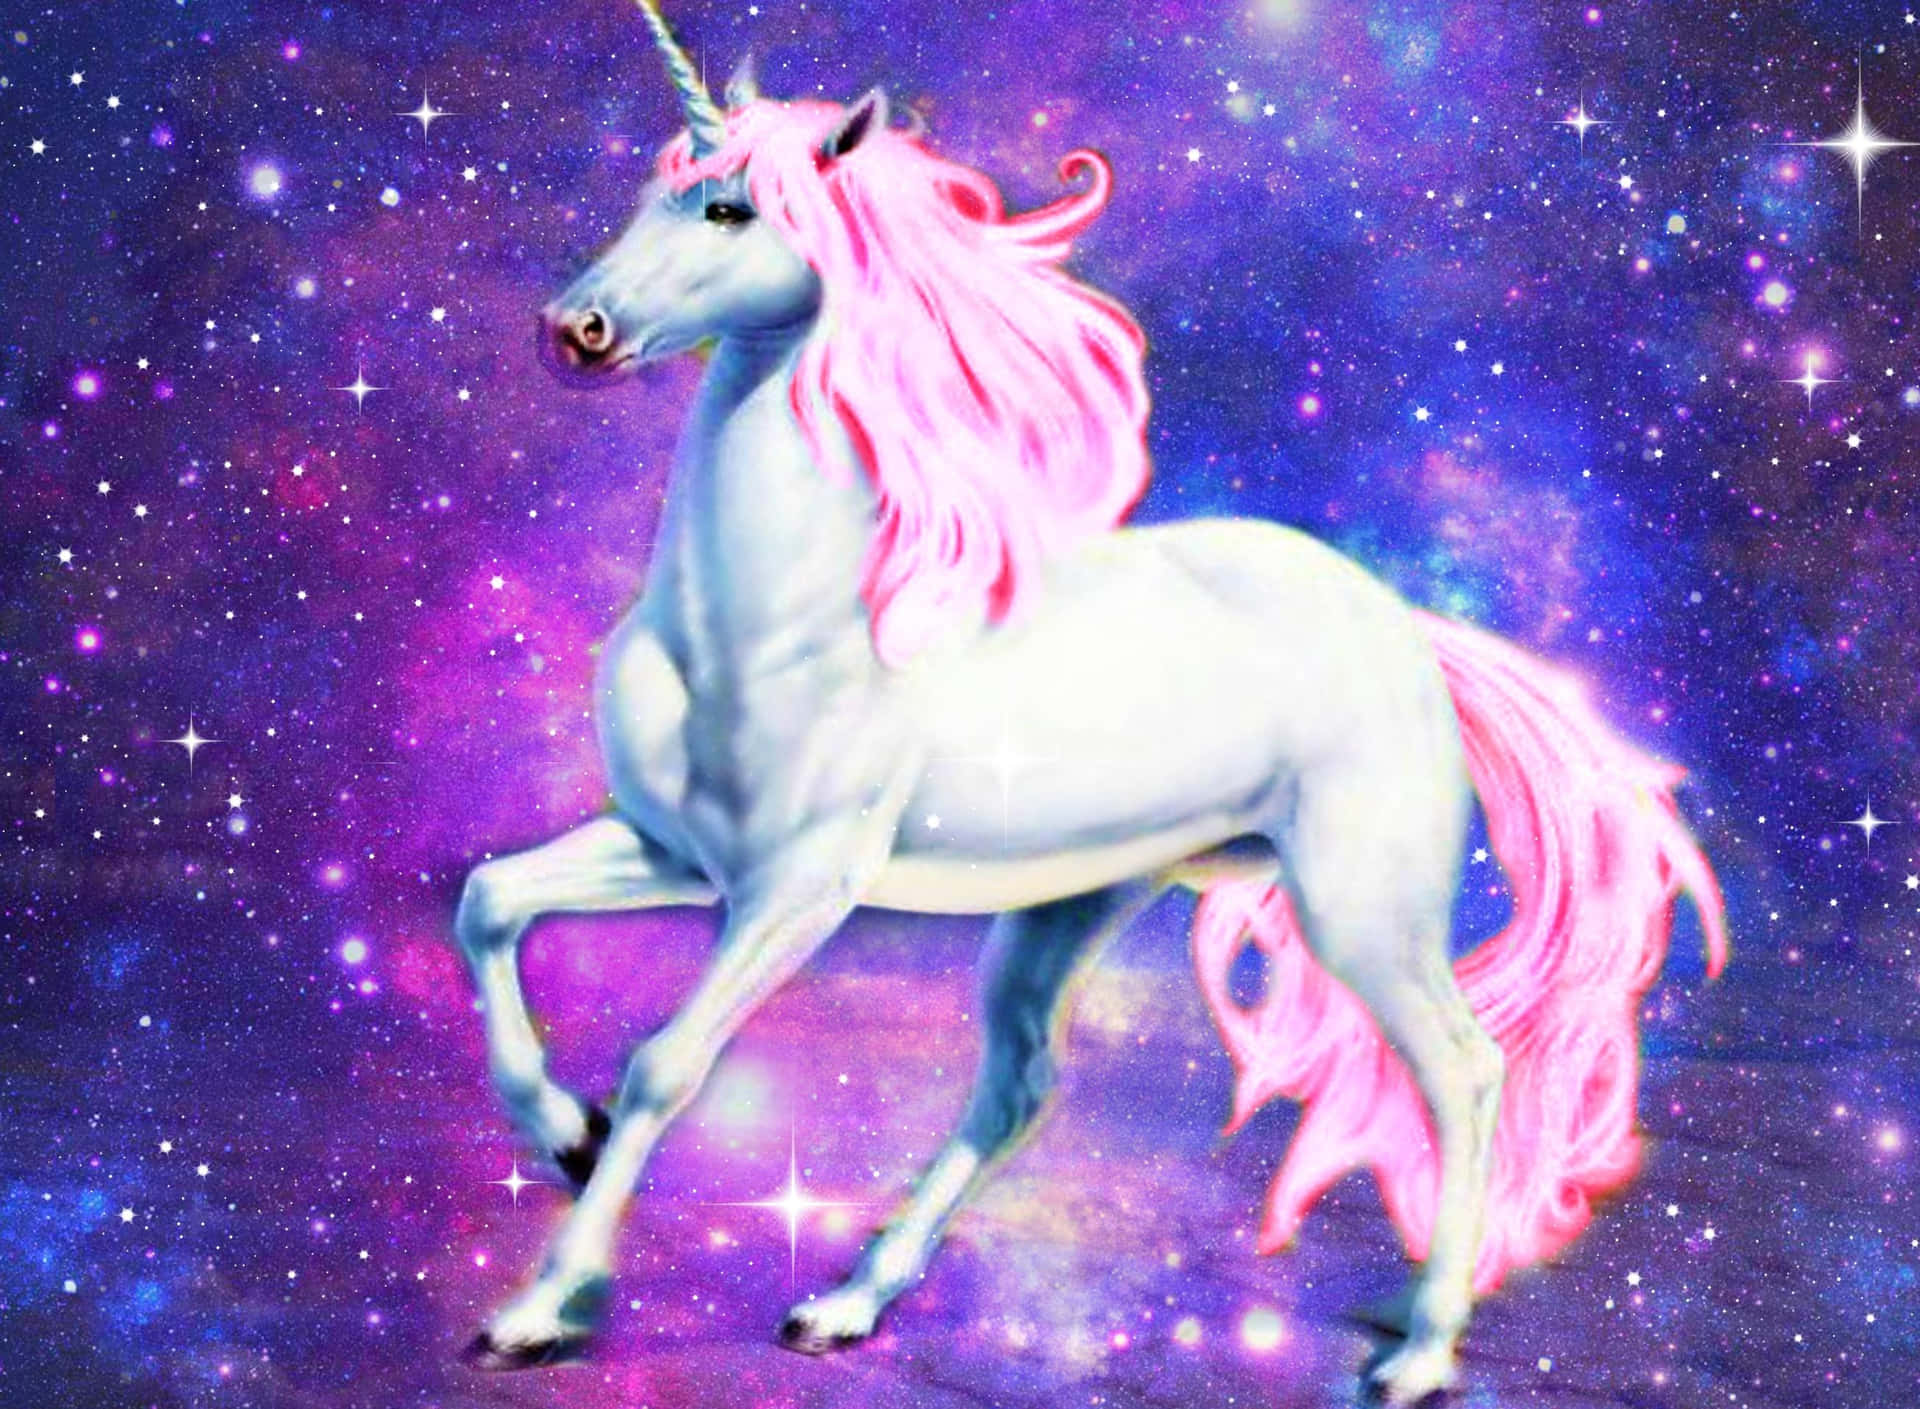 Let Your Imagination Roam Free with this Charming Unicorn Desktop Wallpaper